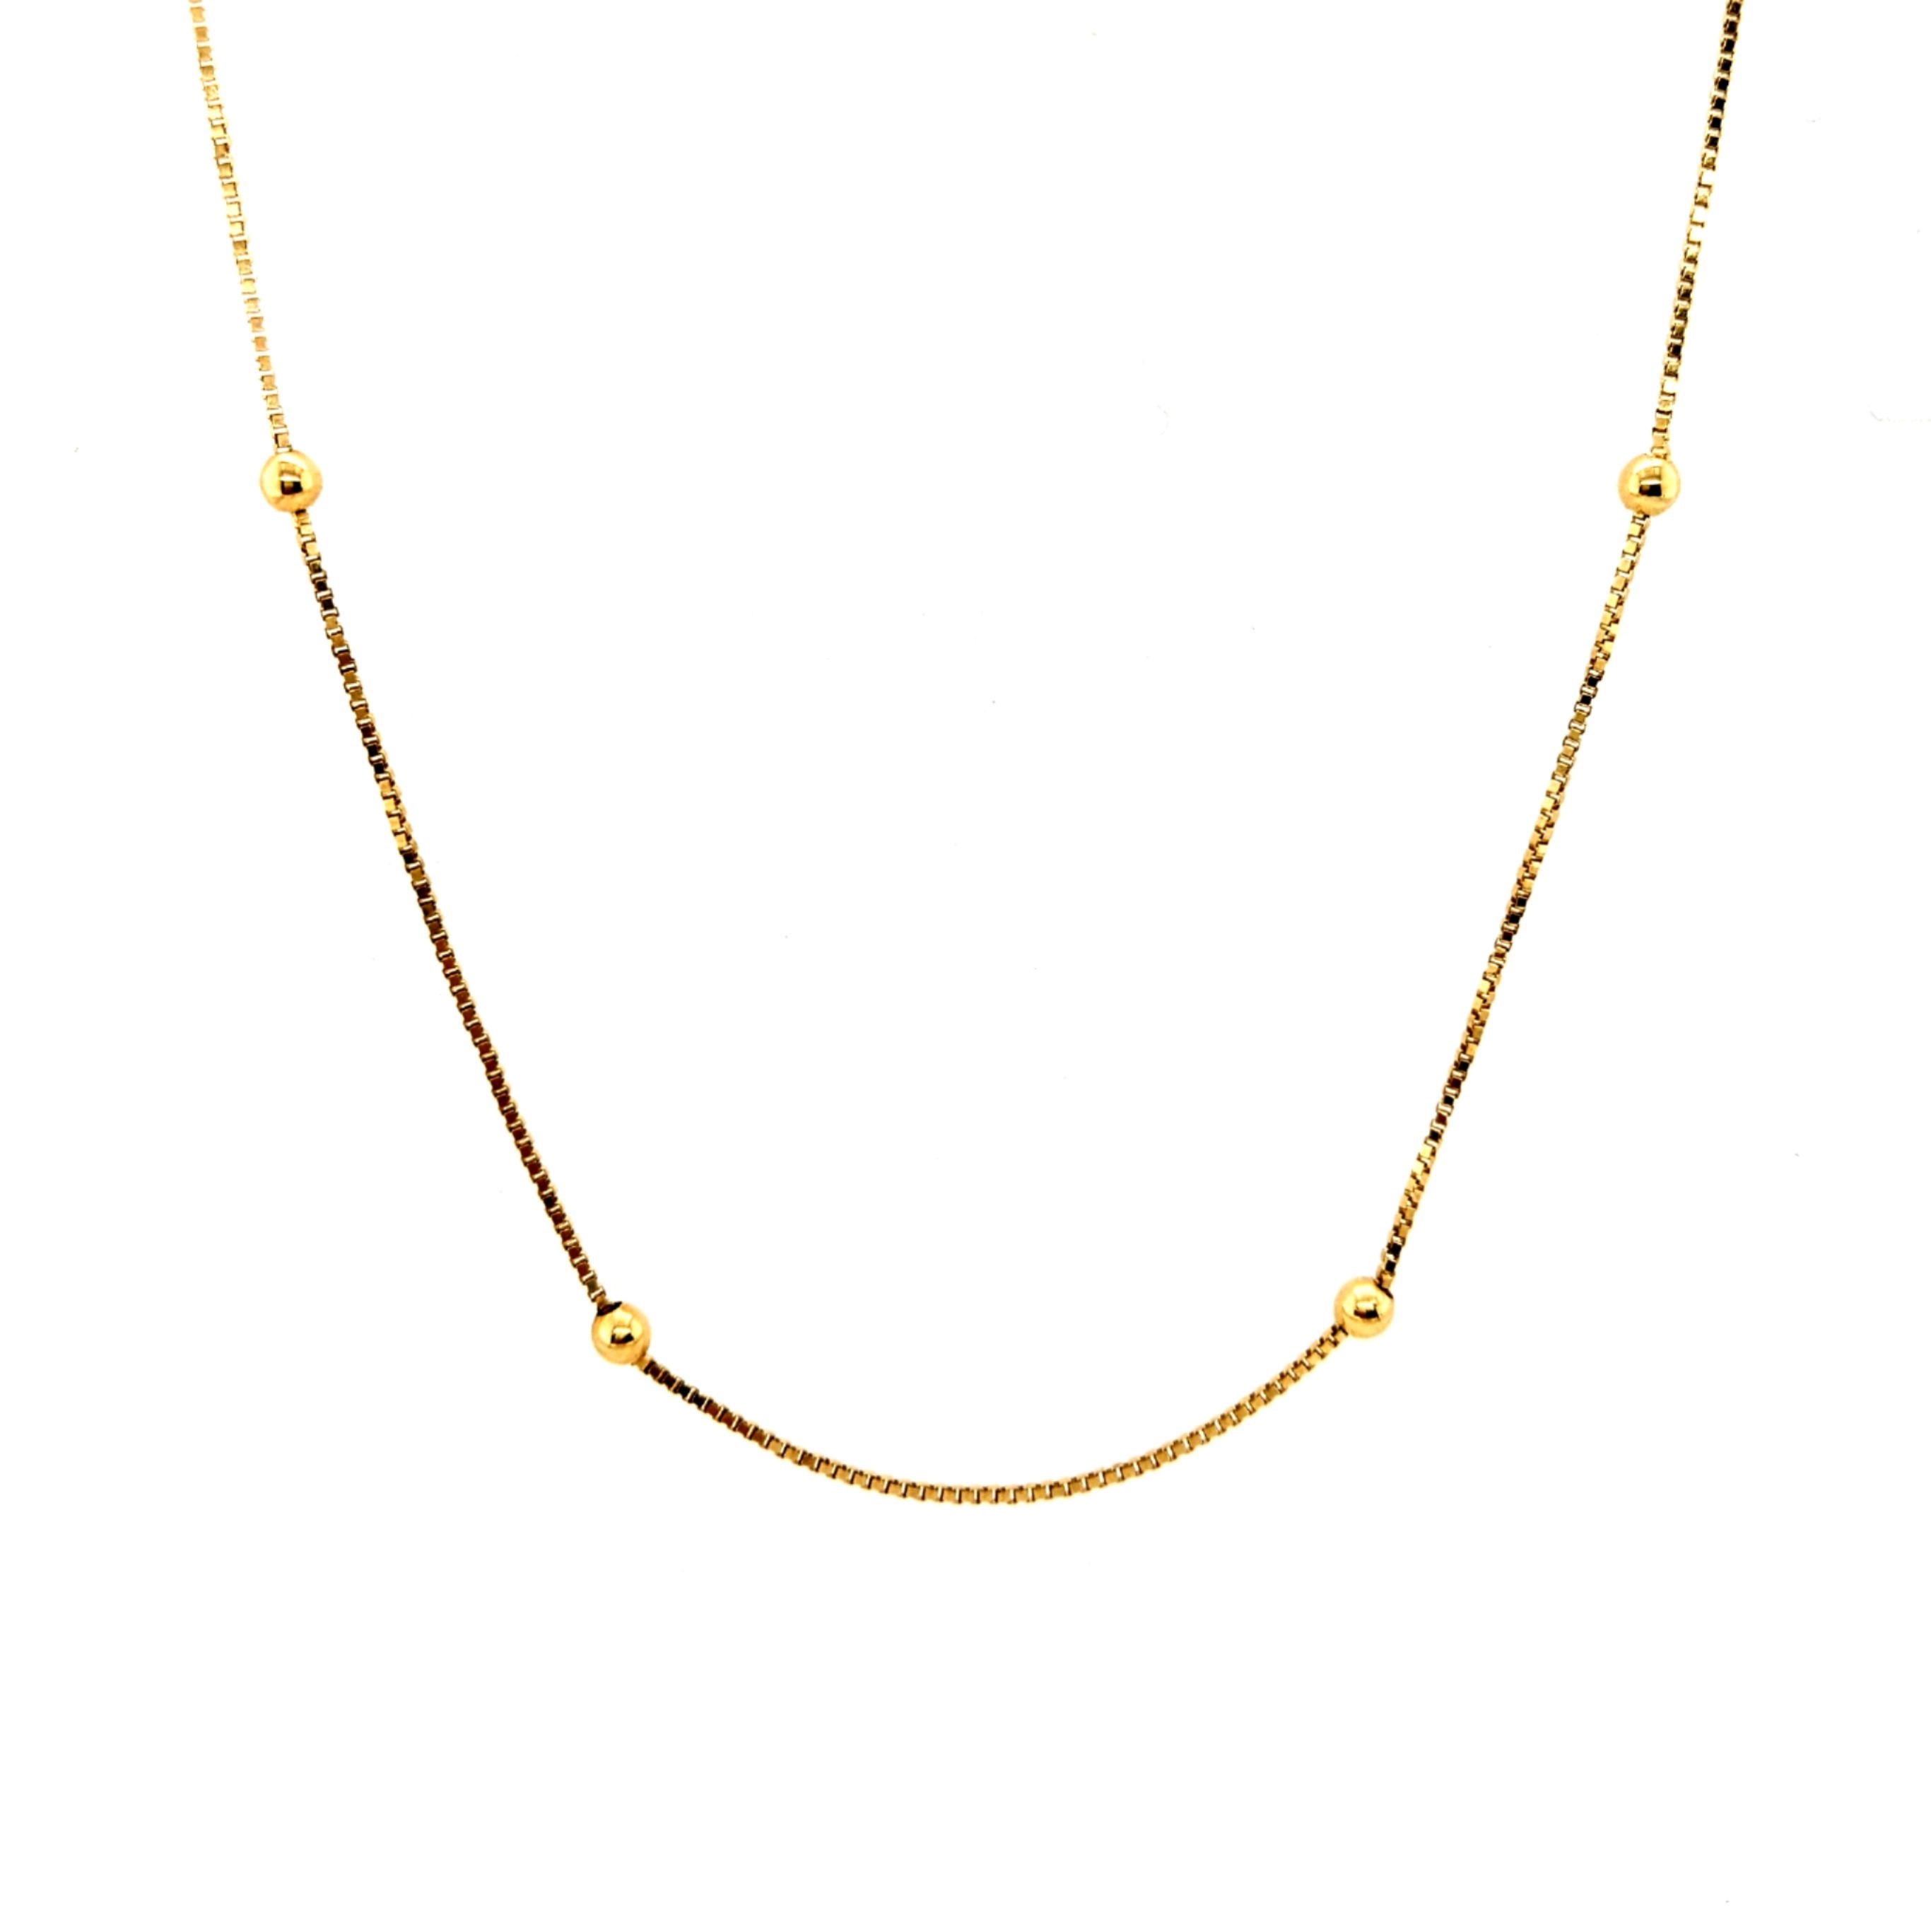 Gold Ball Necklace